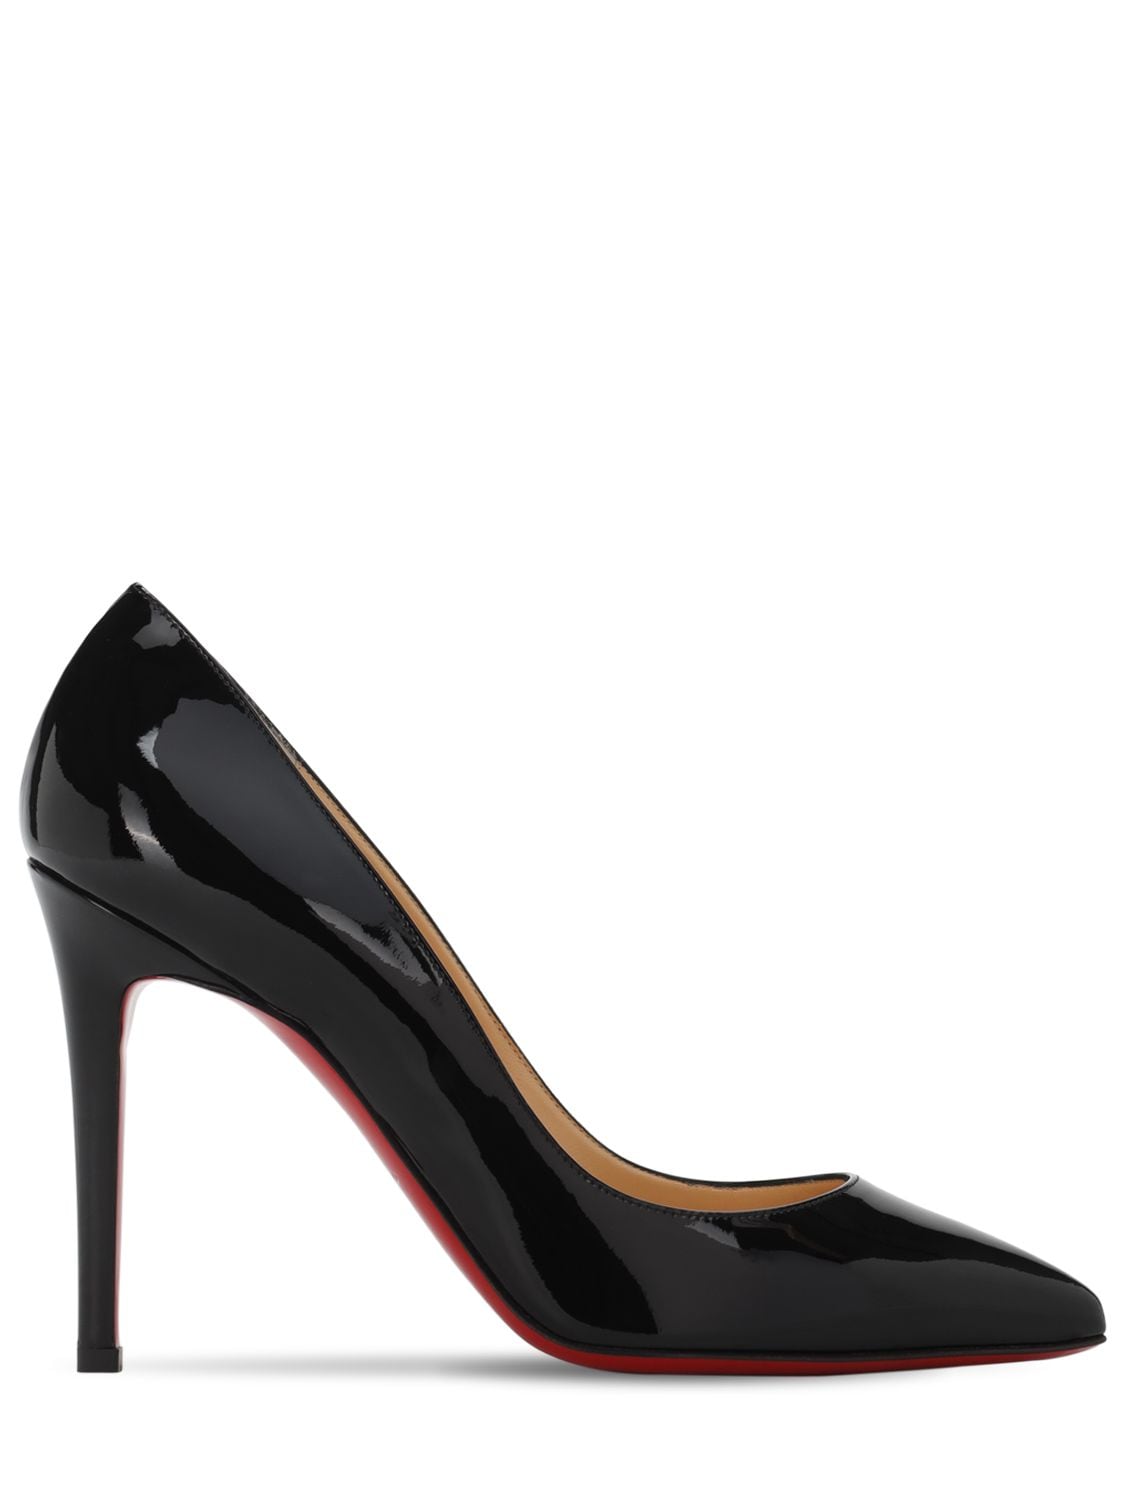 Louboutin 100mm Patent Leather Pumps In Black | ModeSens